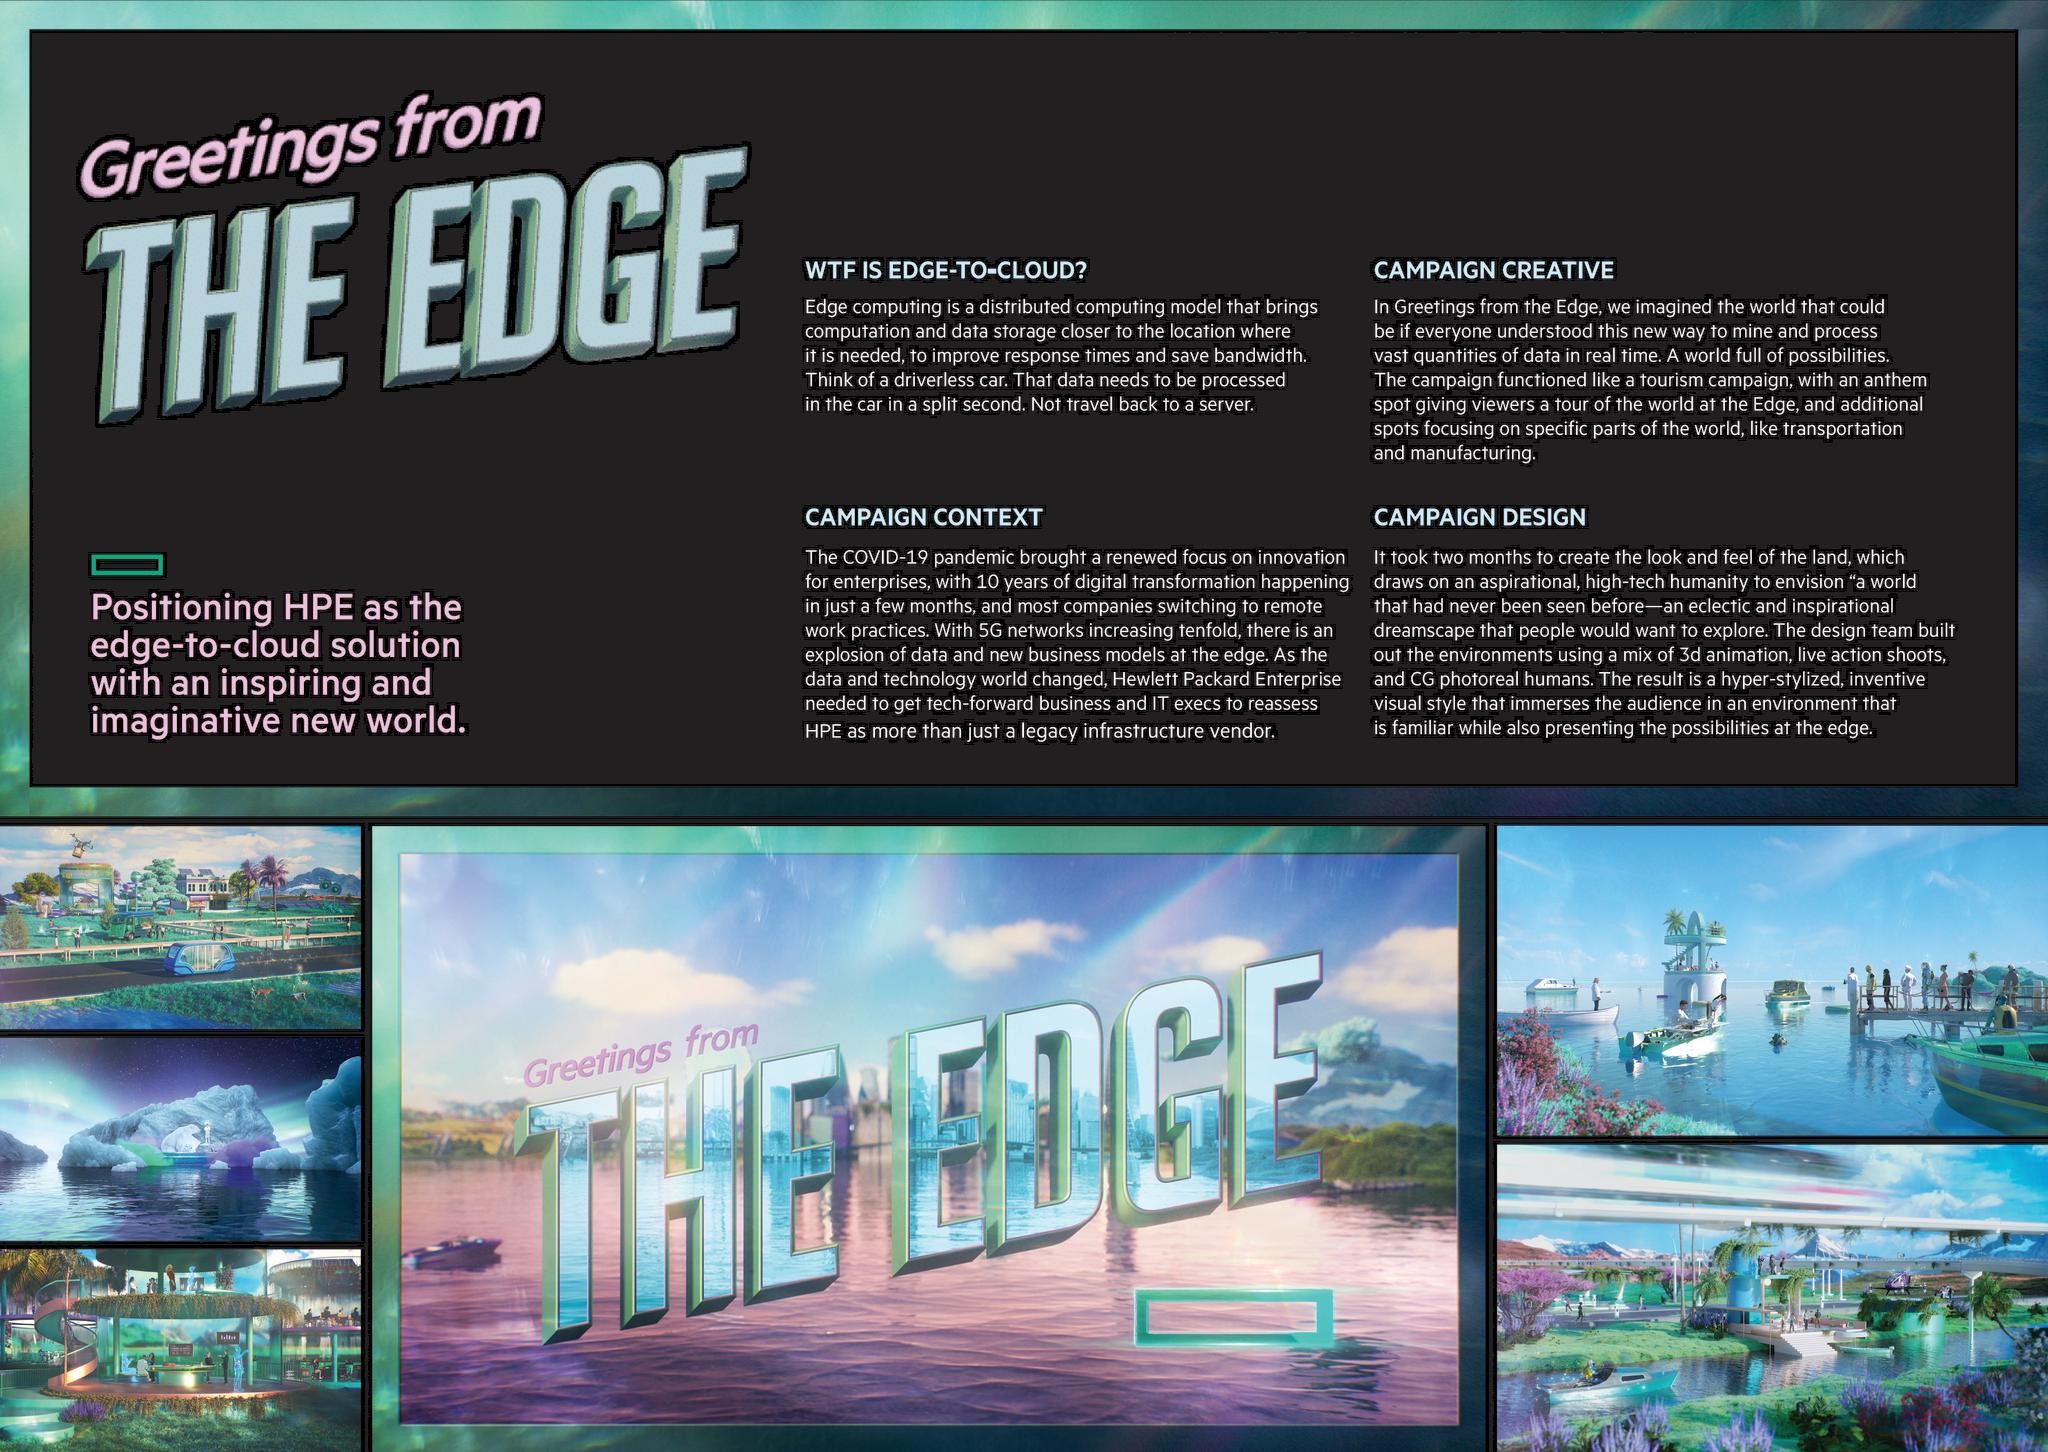 HPE: Greetings from the Edge Campaign